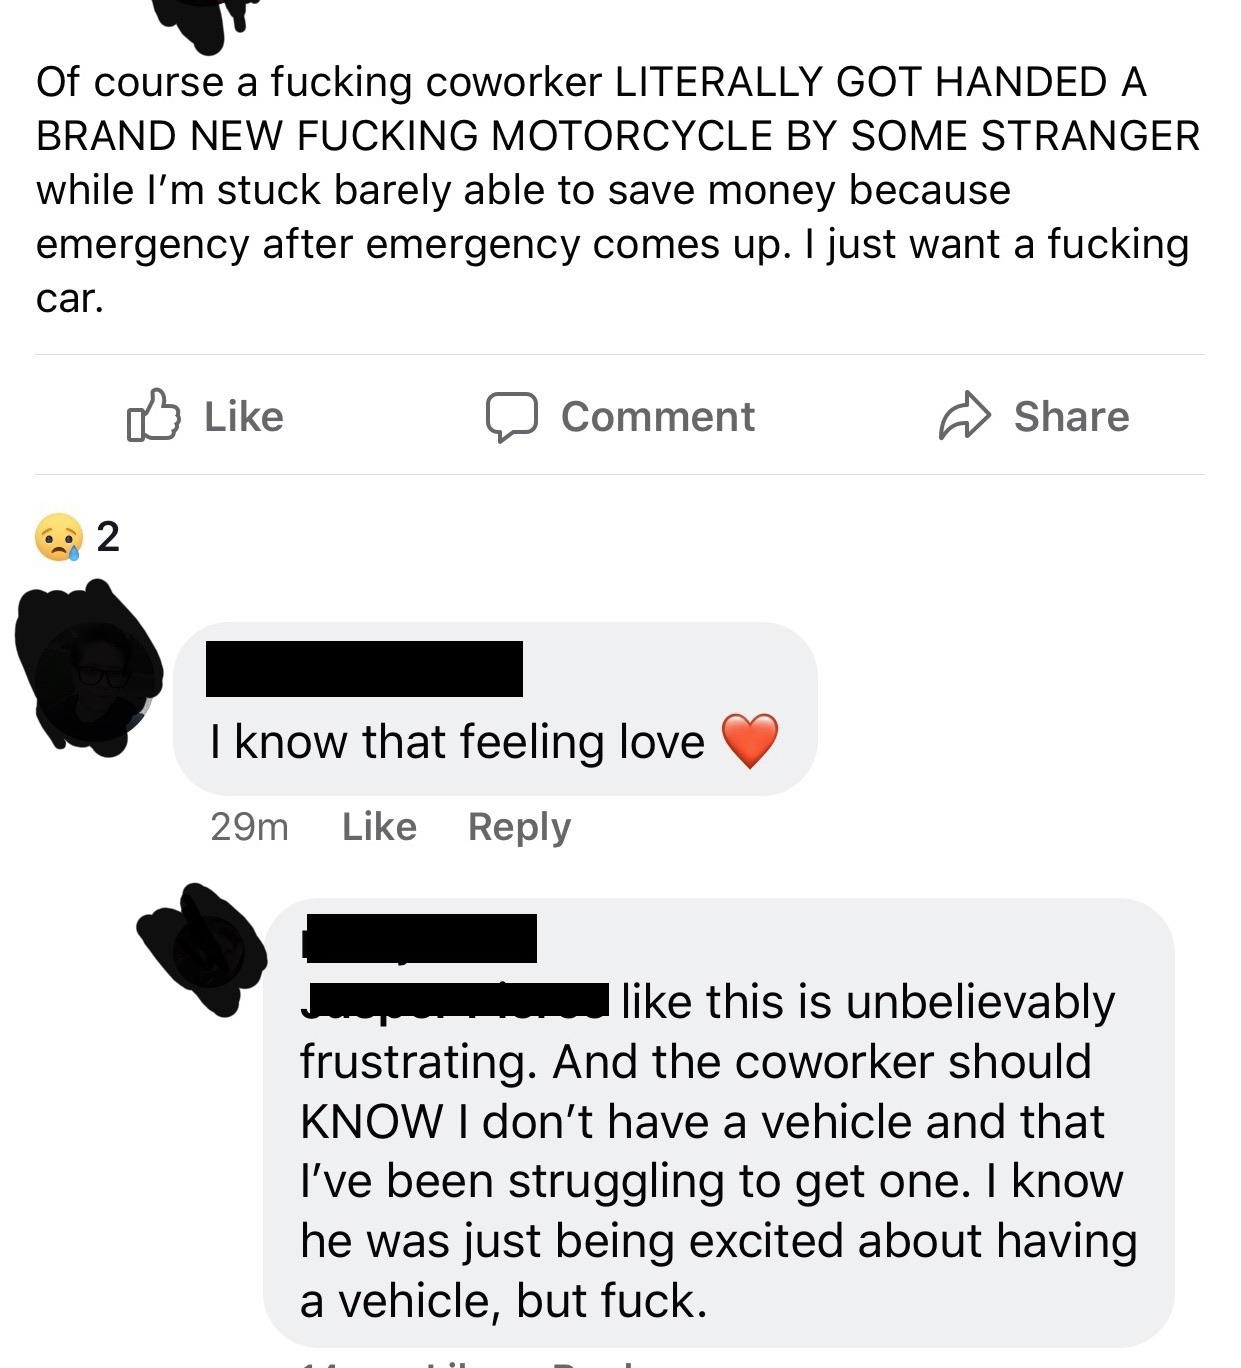 document - Of course a fucking coworker Literally Got Handed A Brand New Fucking Motorcycle By Some Stranger while I'm stuck barely able to save money because emergency after emergency comes up. I just want a fucking car. Comment I know that feeling love 